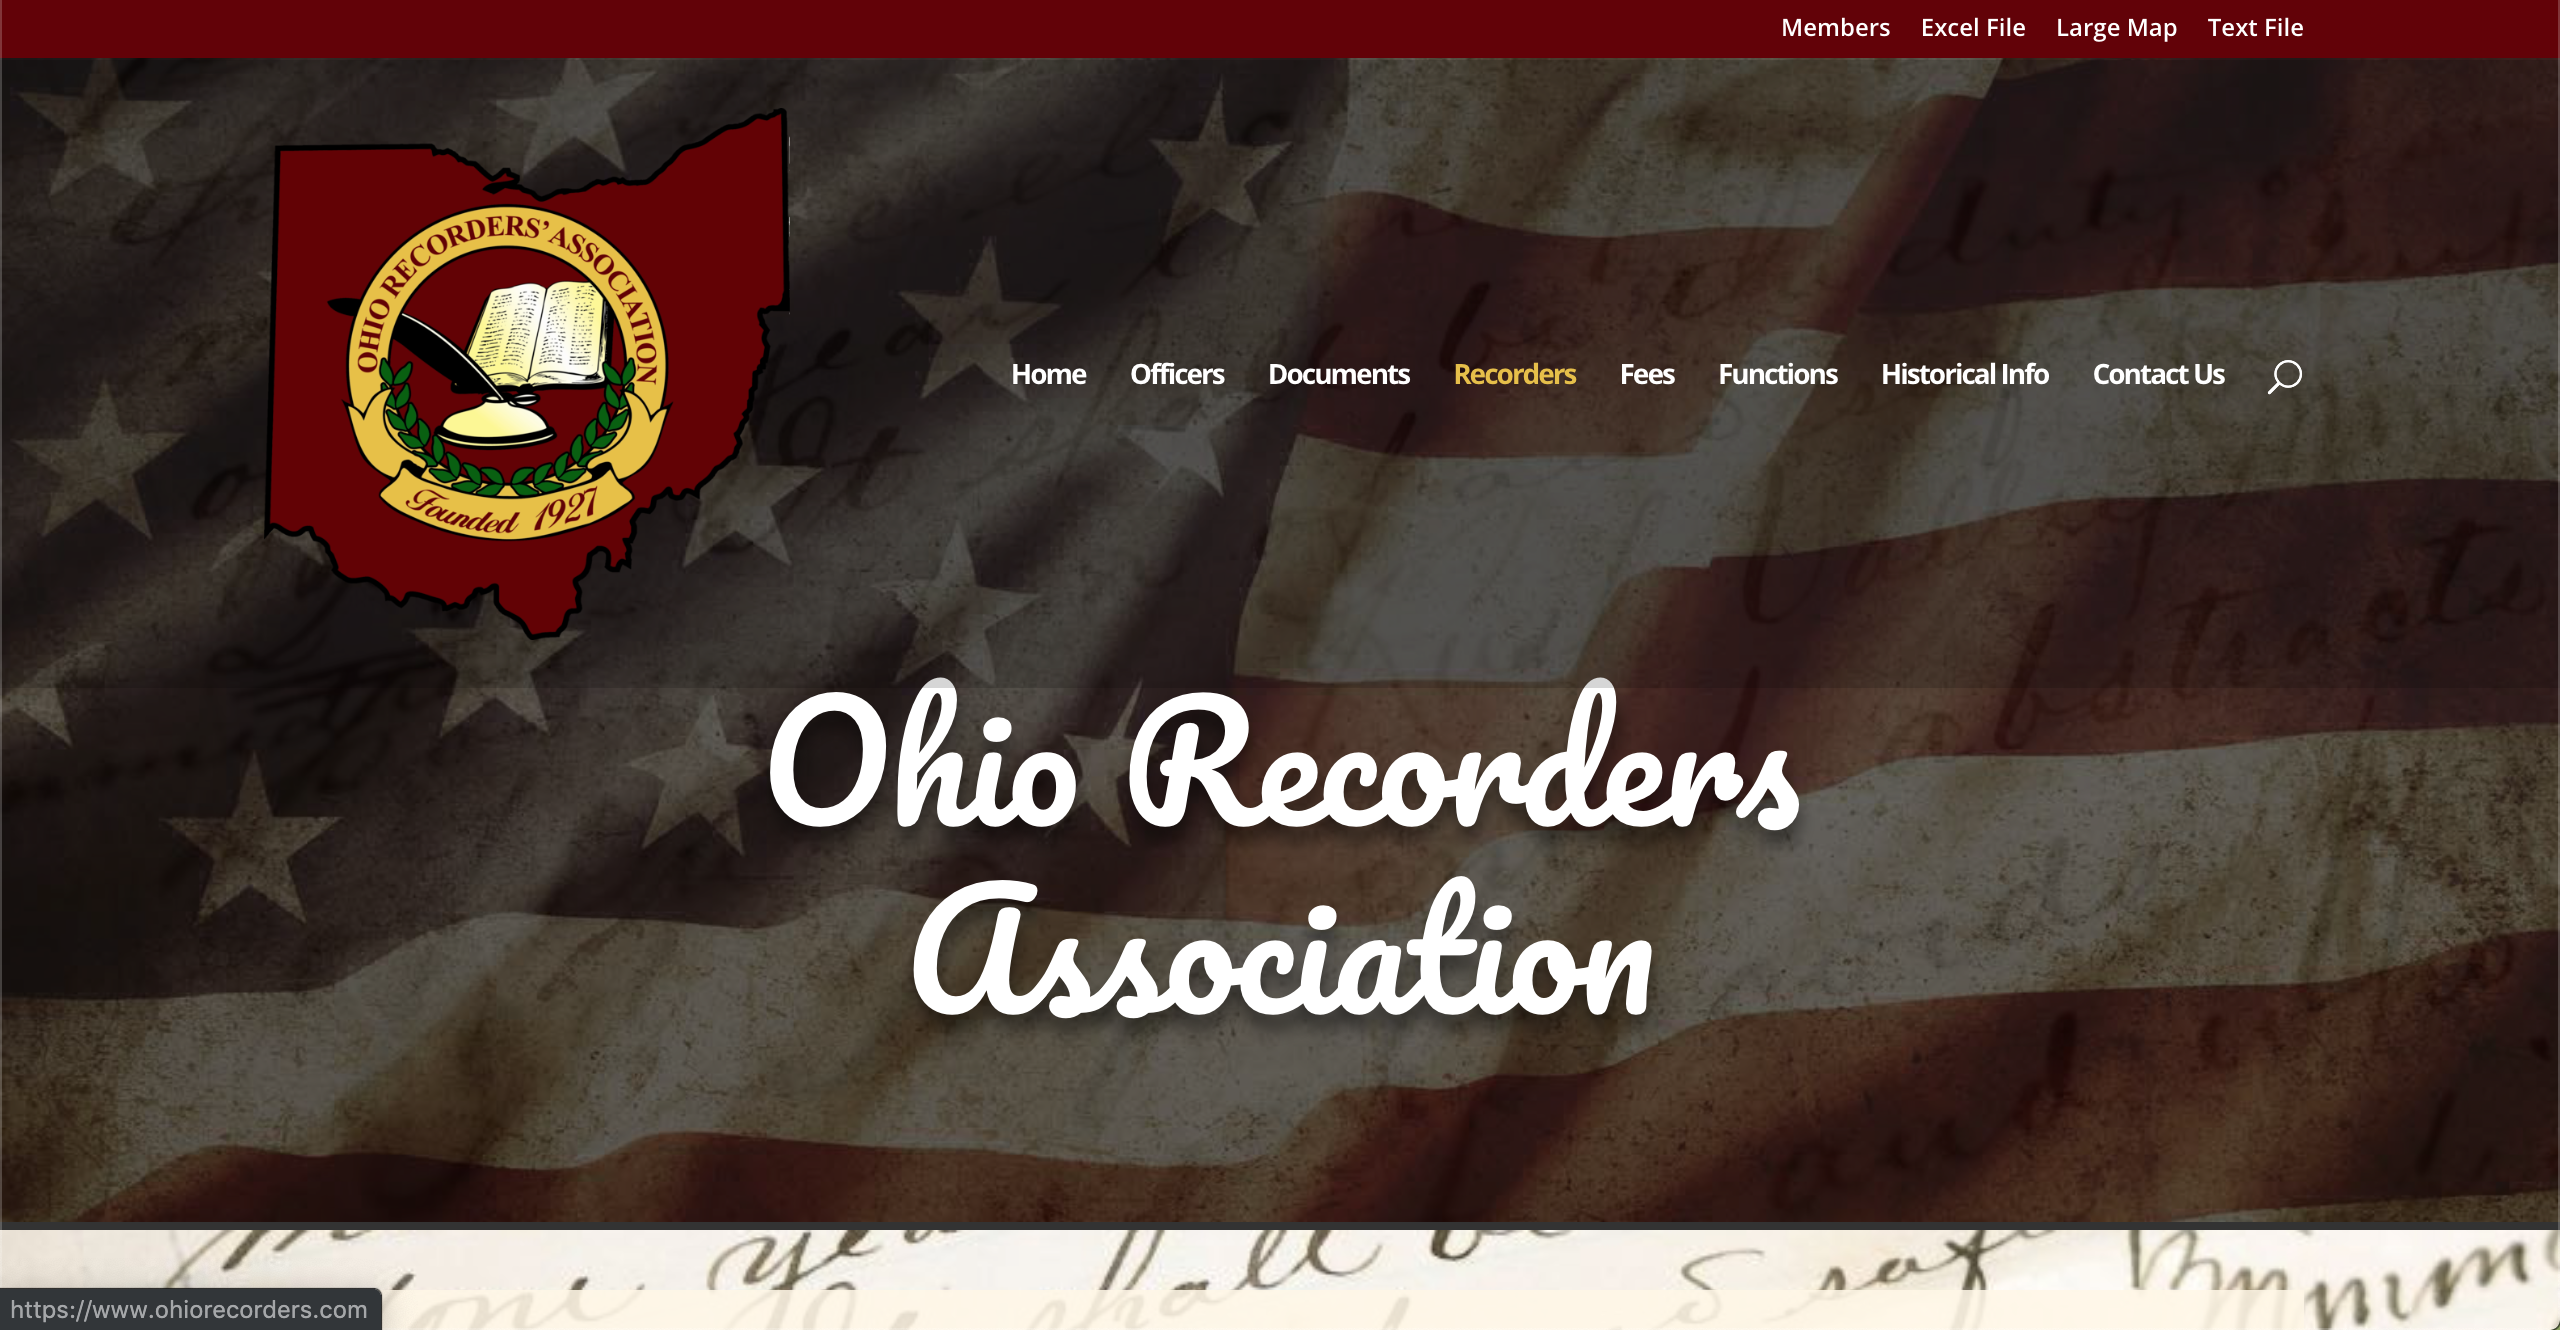 ohio recorders association page